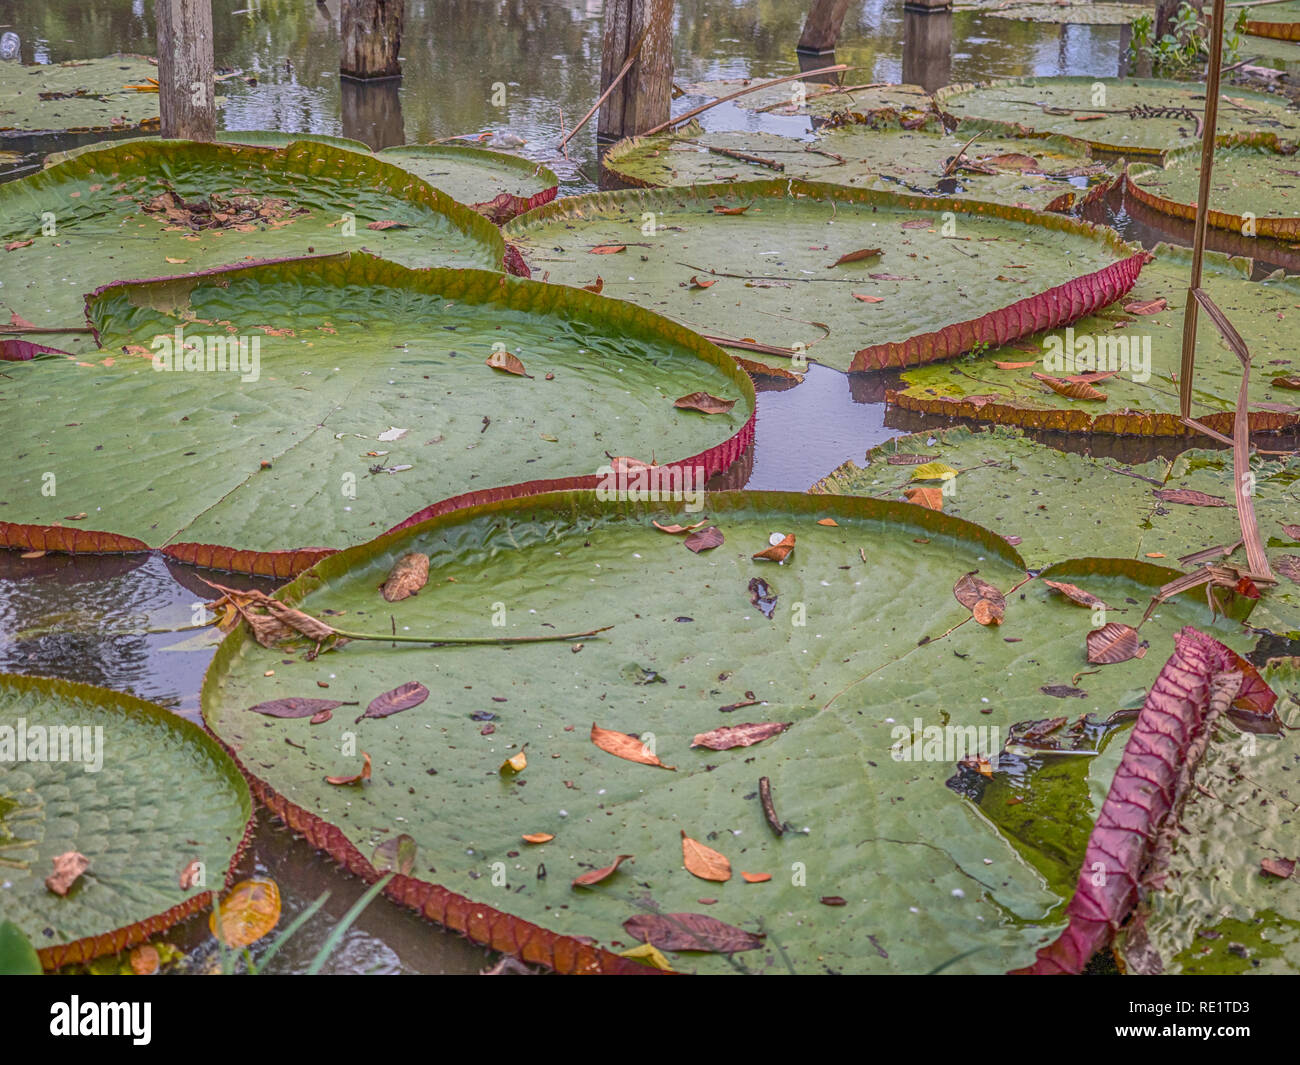 Victoria amazonica in the park of Leticia, Colombia. It is a species of flowering plant, the largest of the Nymphaeaceae family of water lilies. The l Stock Photo